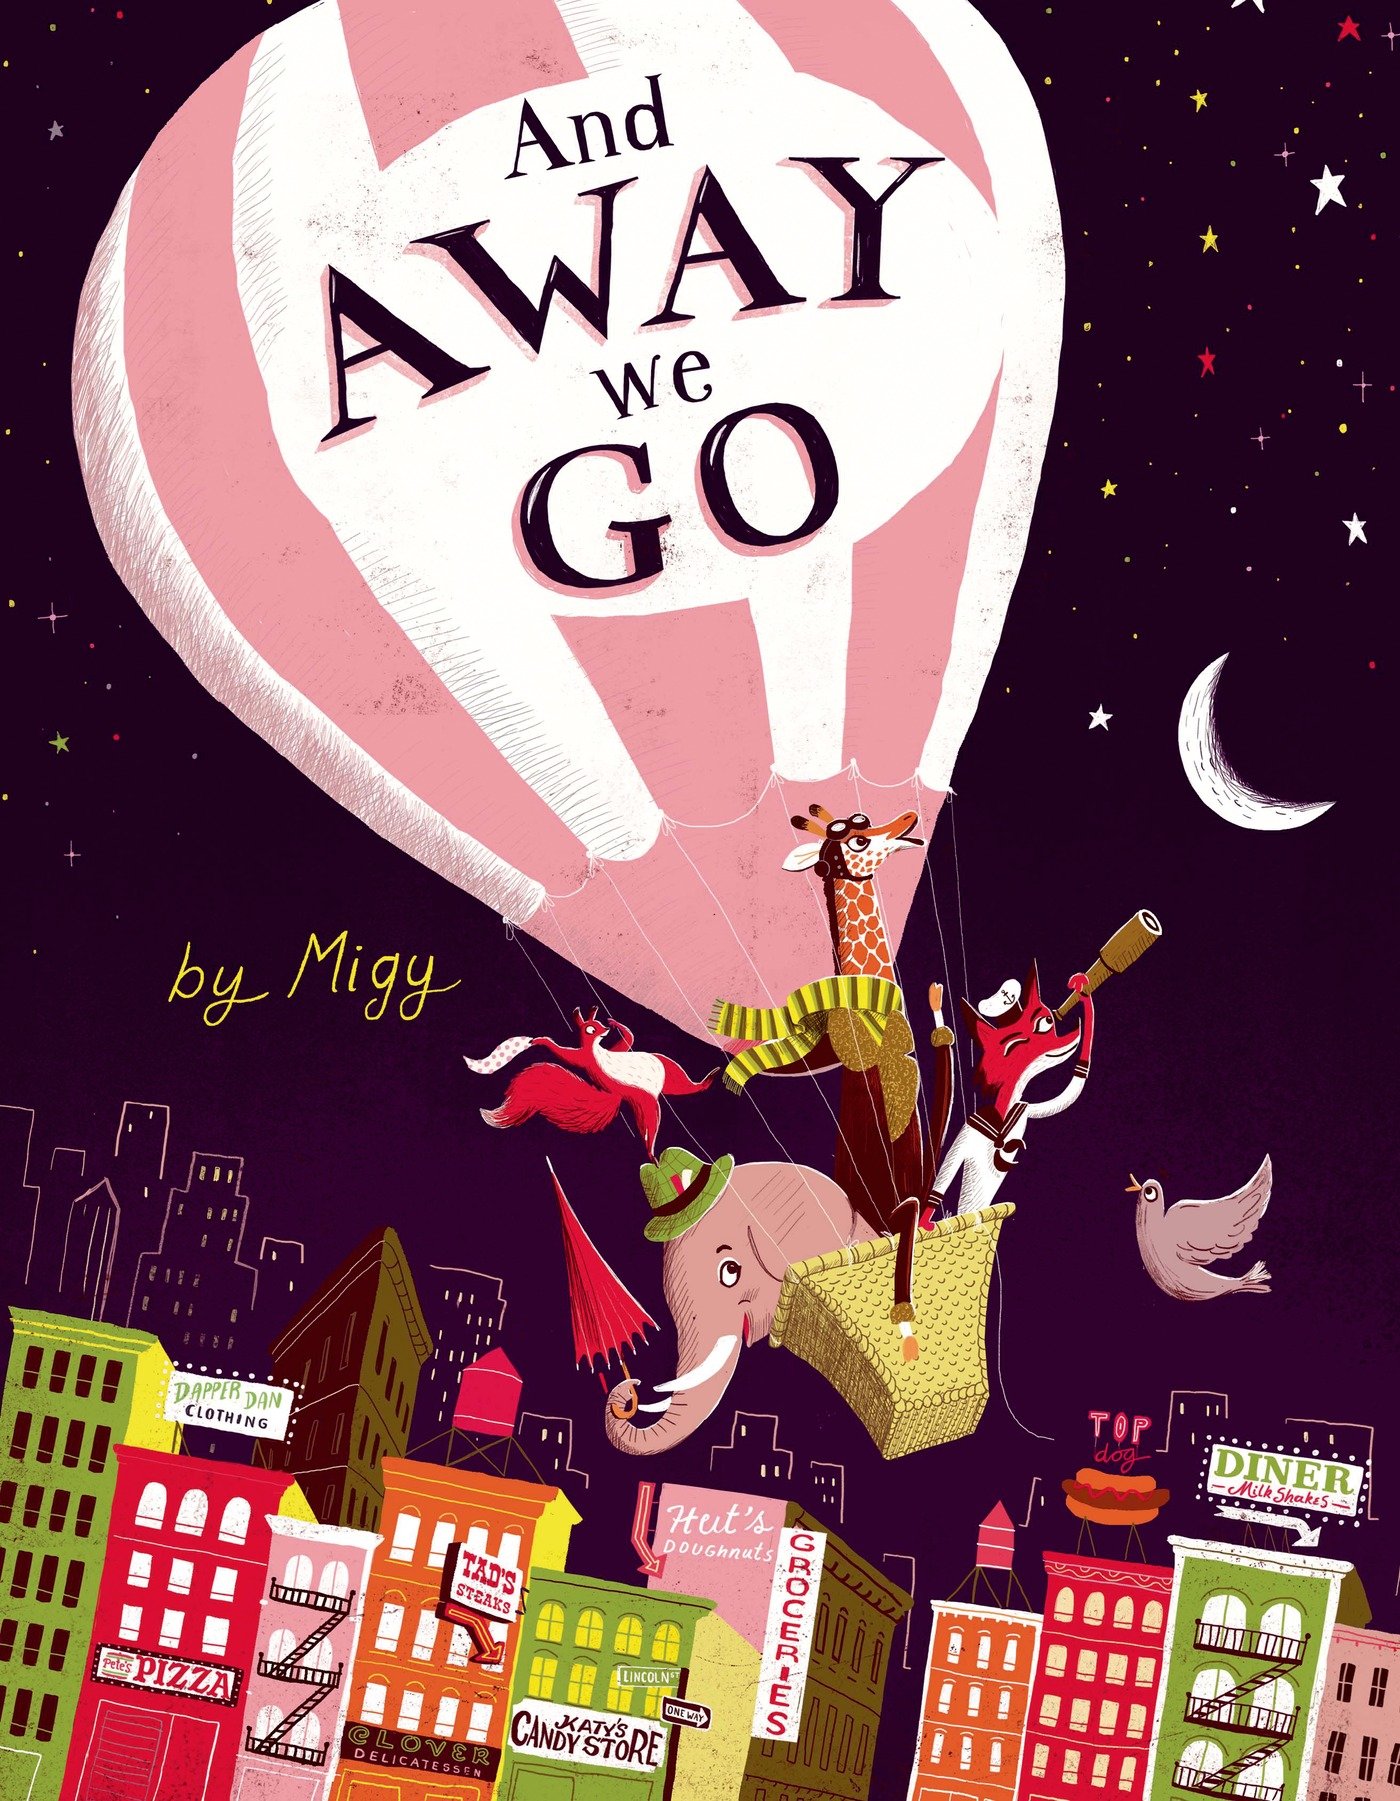 AndAwayWeGo Librarian Preview: Macmillan Childrens Publishing Group (Fall 2014)